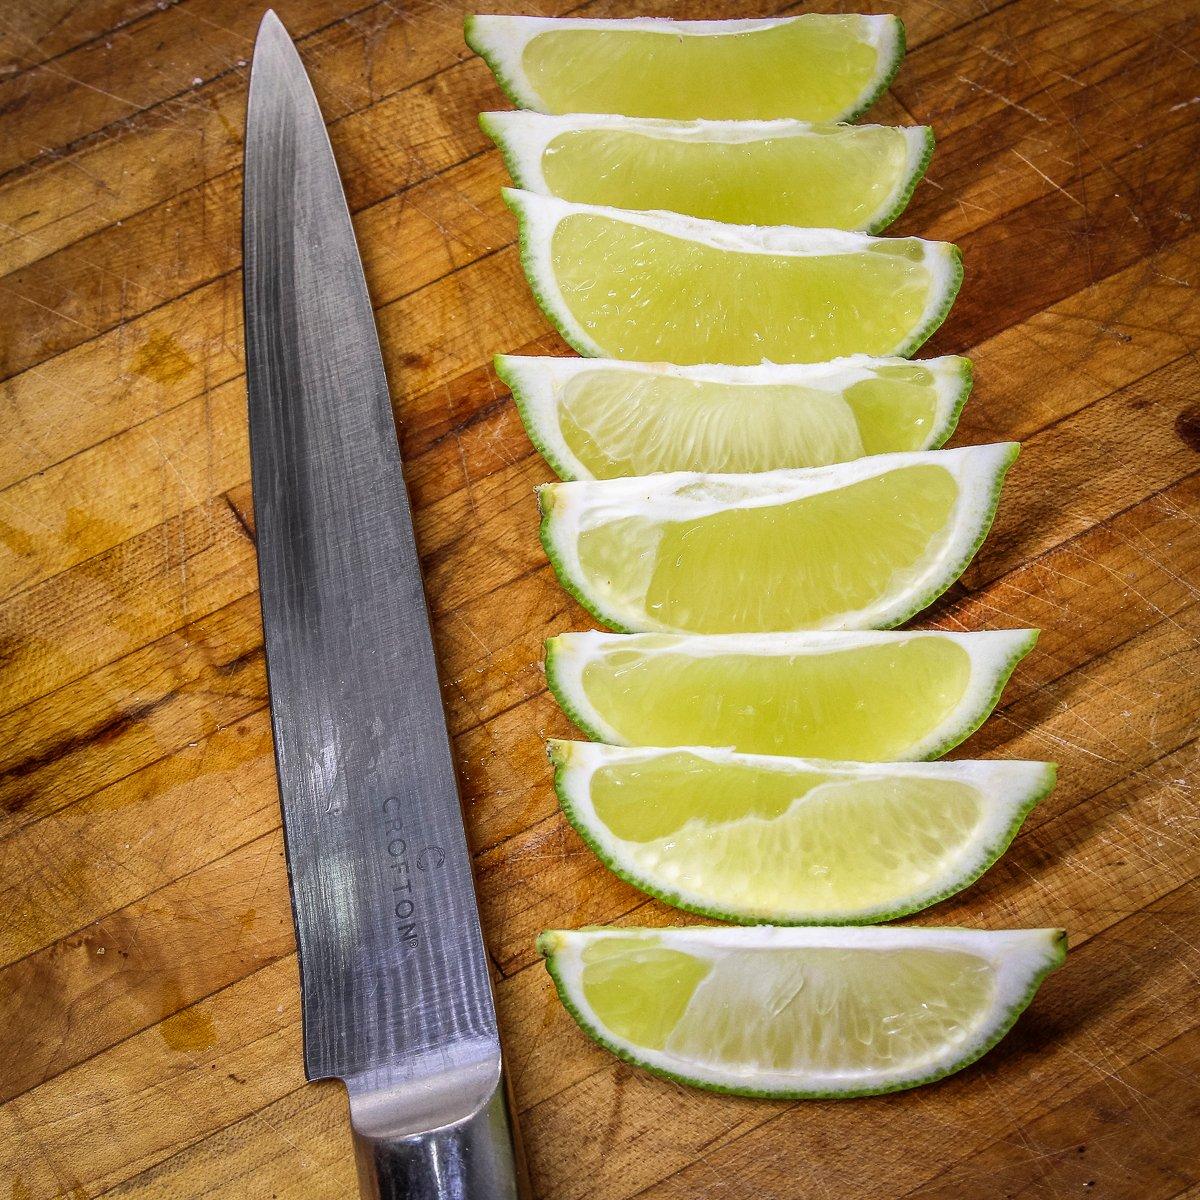 Serve the tacos with lime wedges to squeeze at the table.